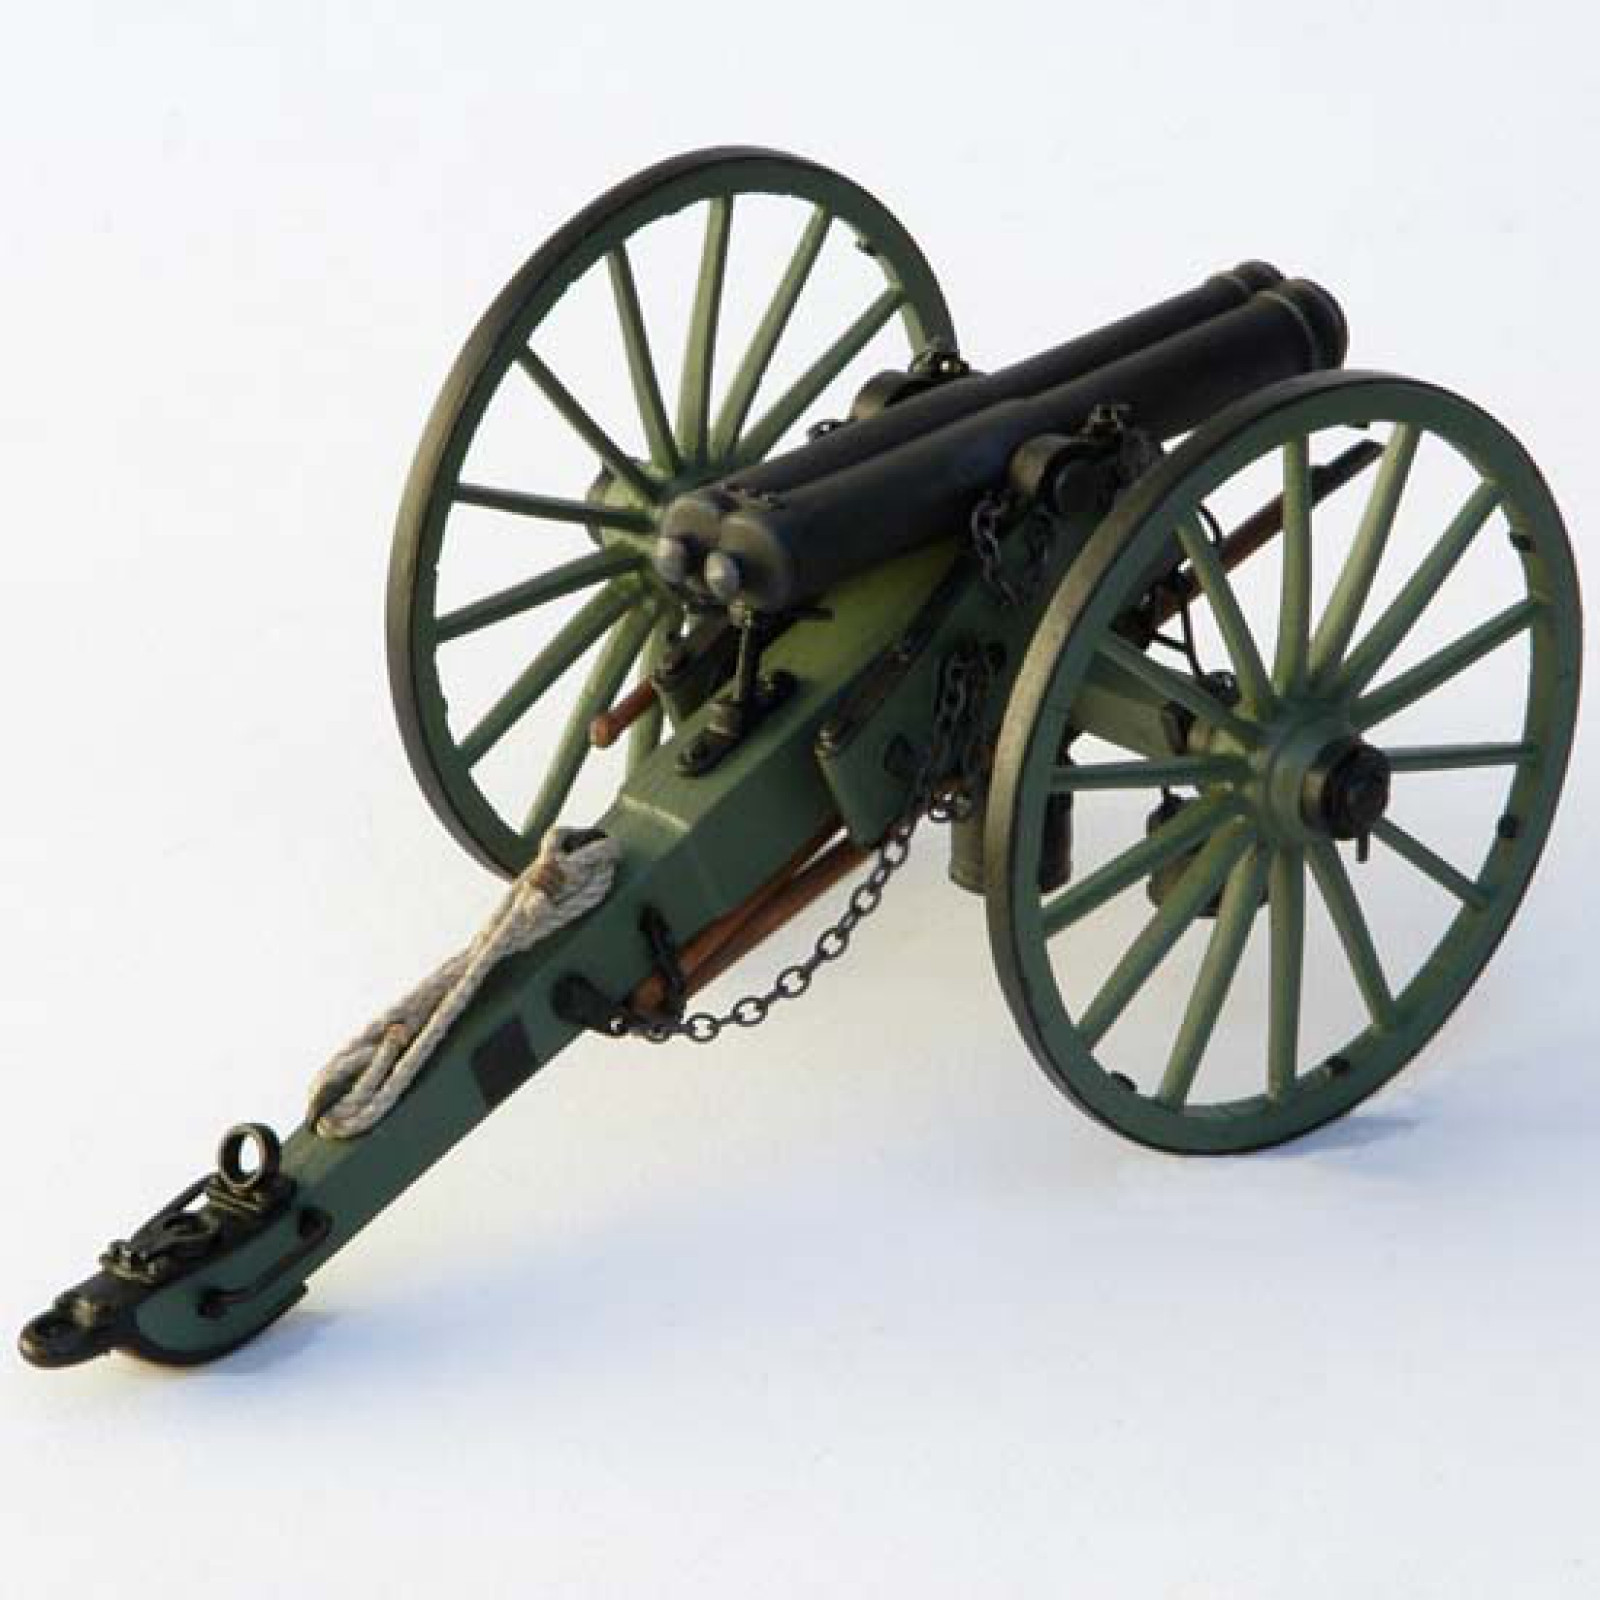 GUNS OF HISTORY DOUBLE BARREL CANNON 1:16 SCALE